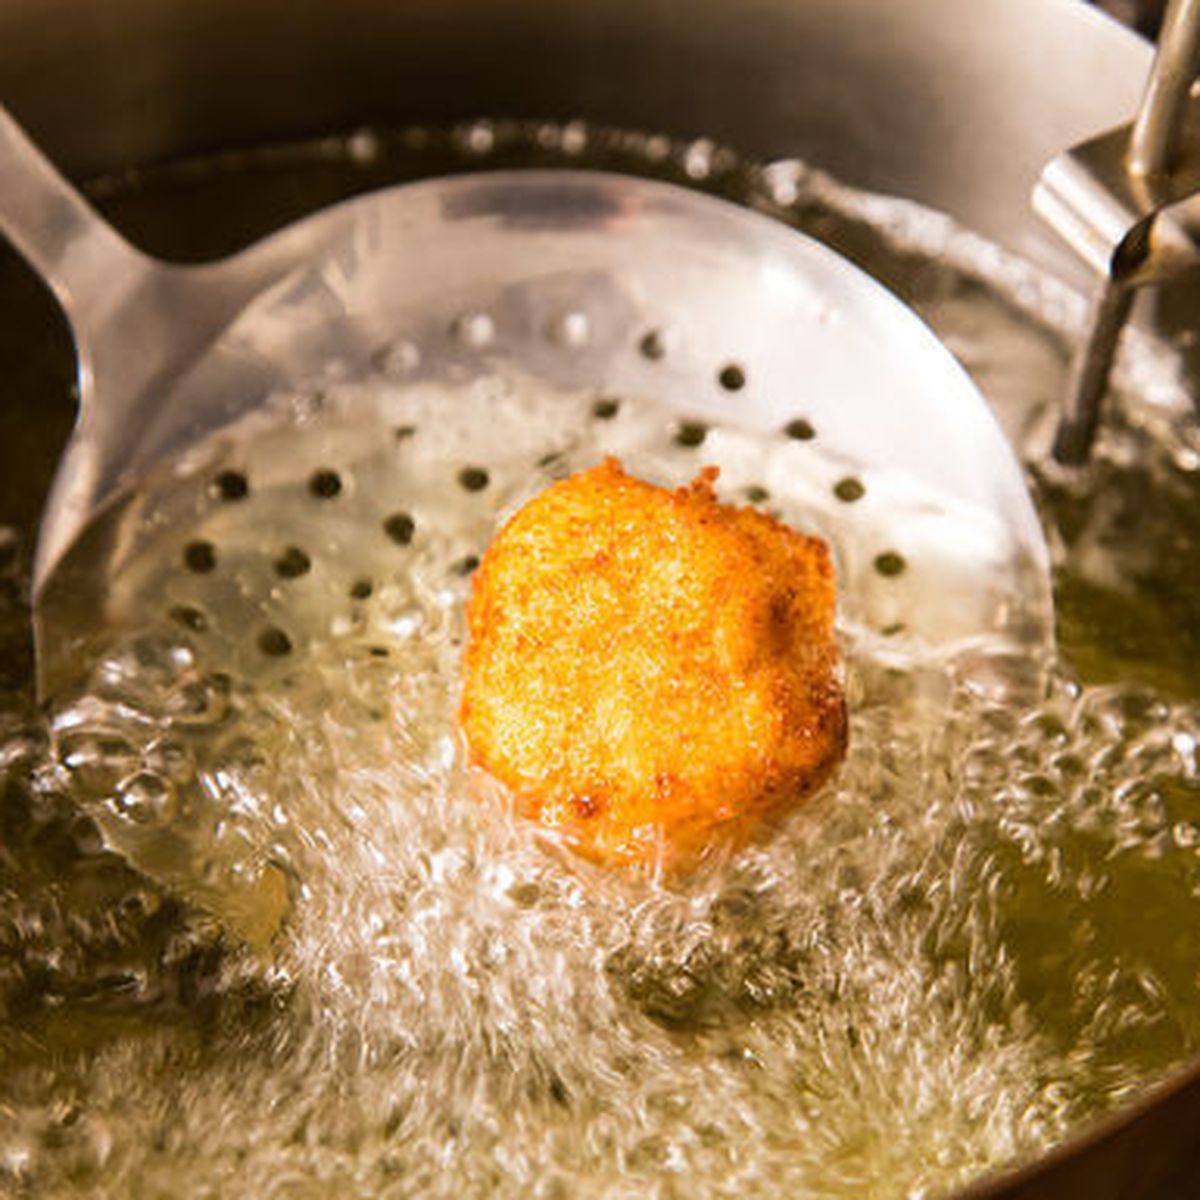 Golden rules to keep in mind while deep frying